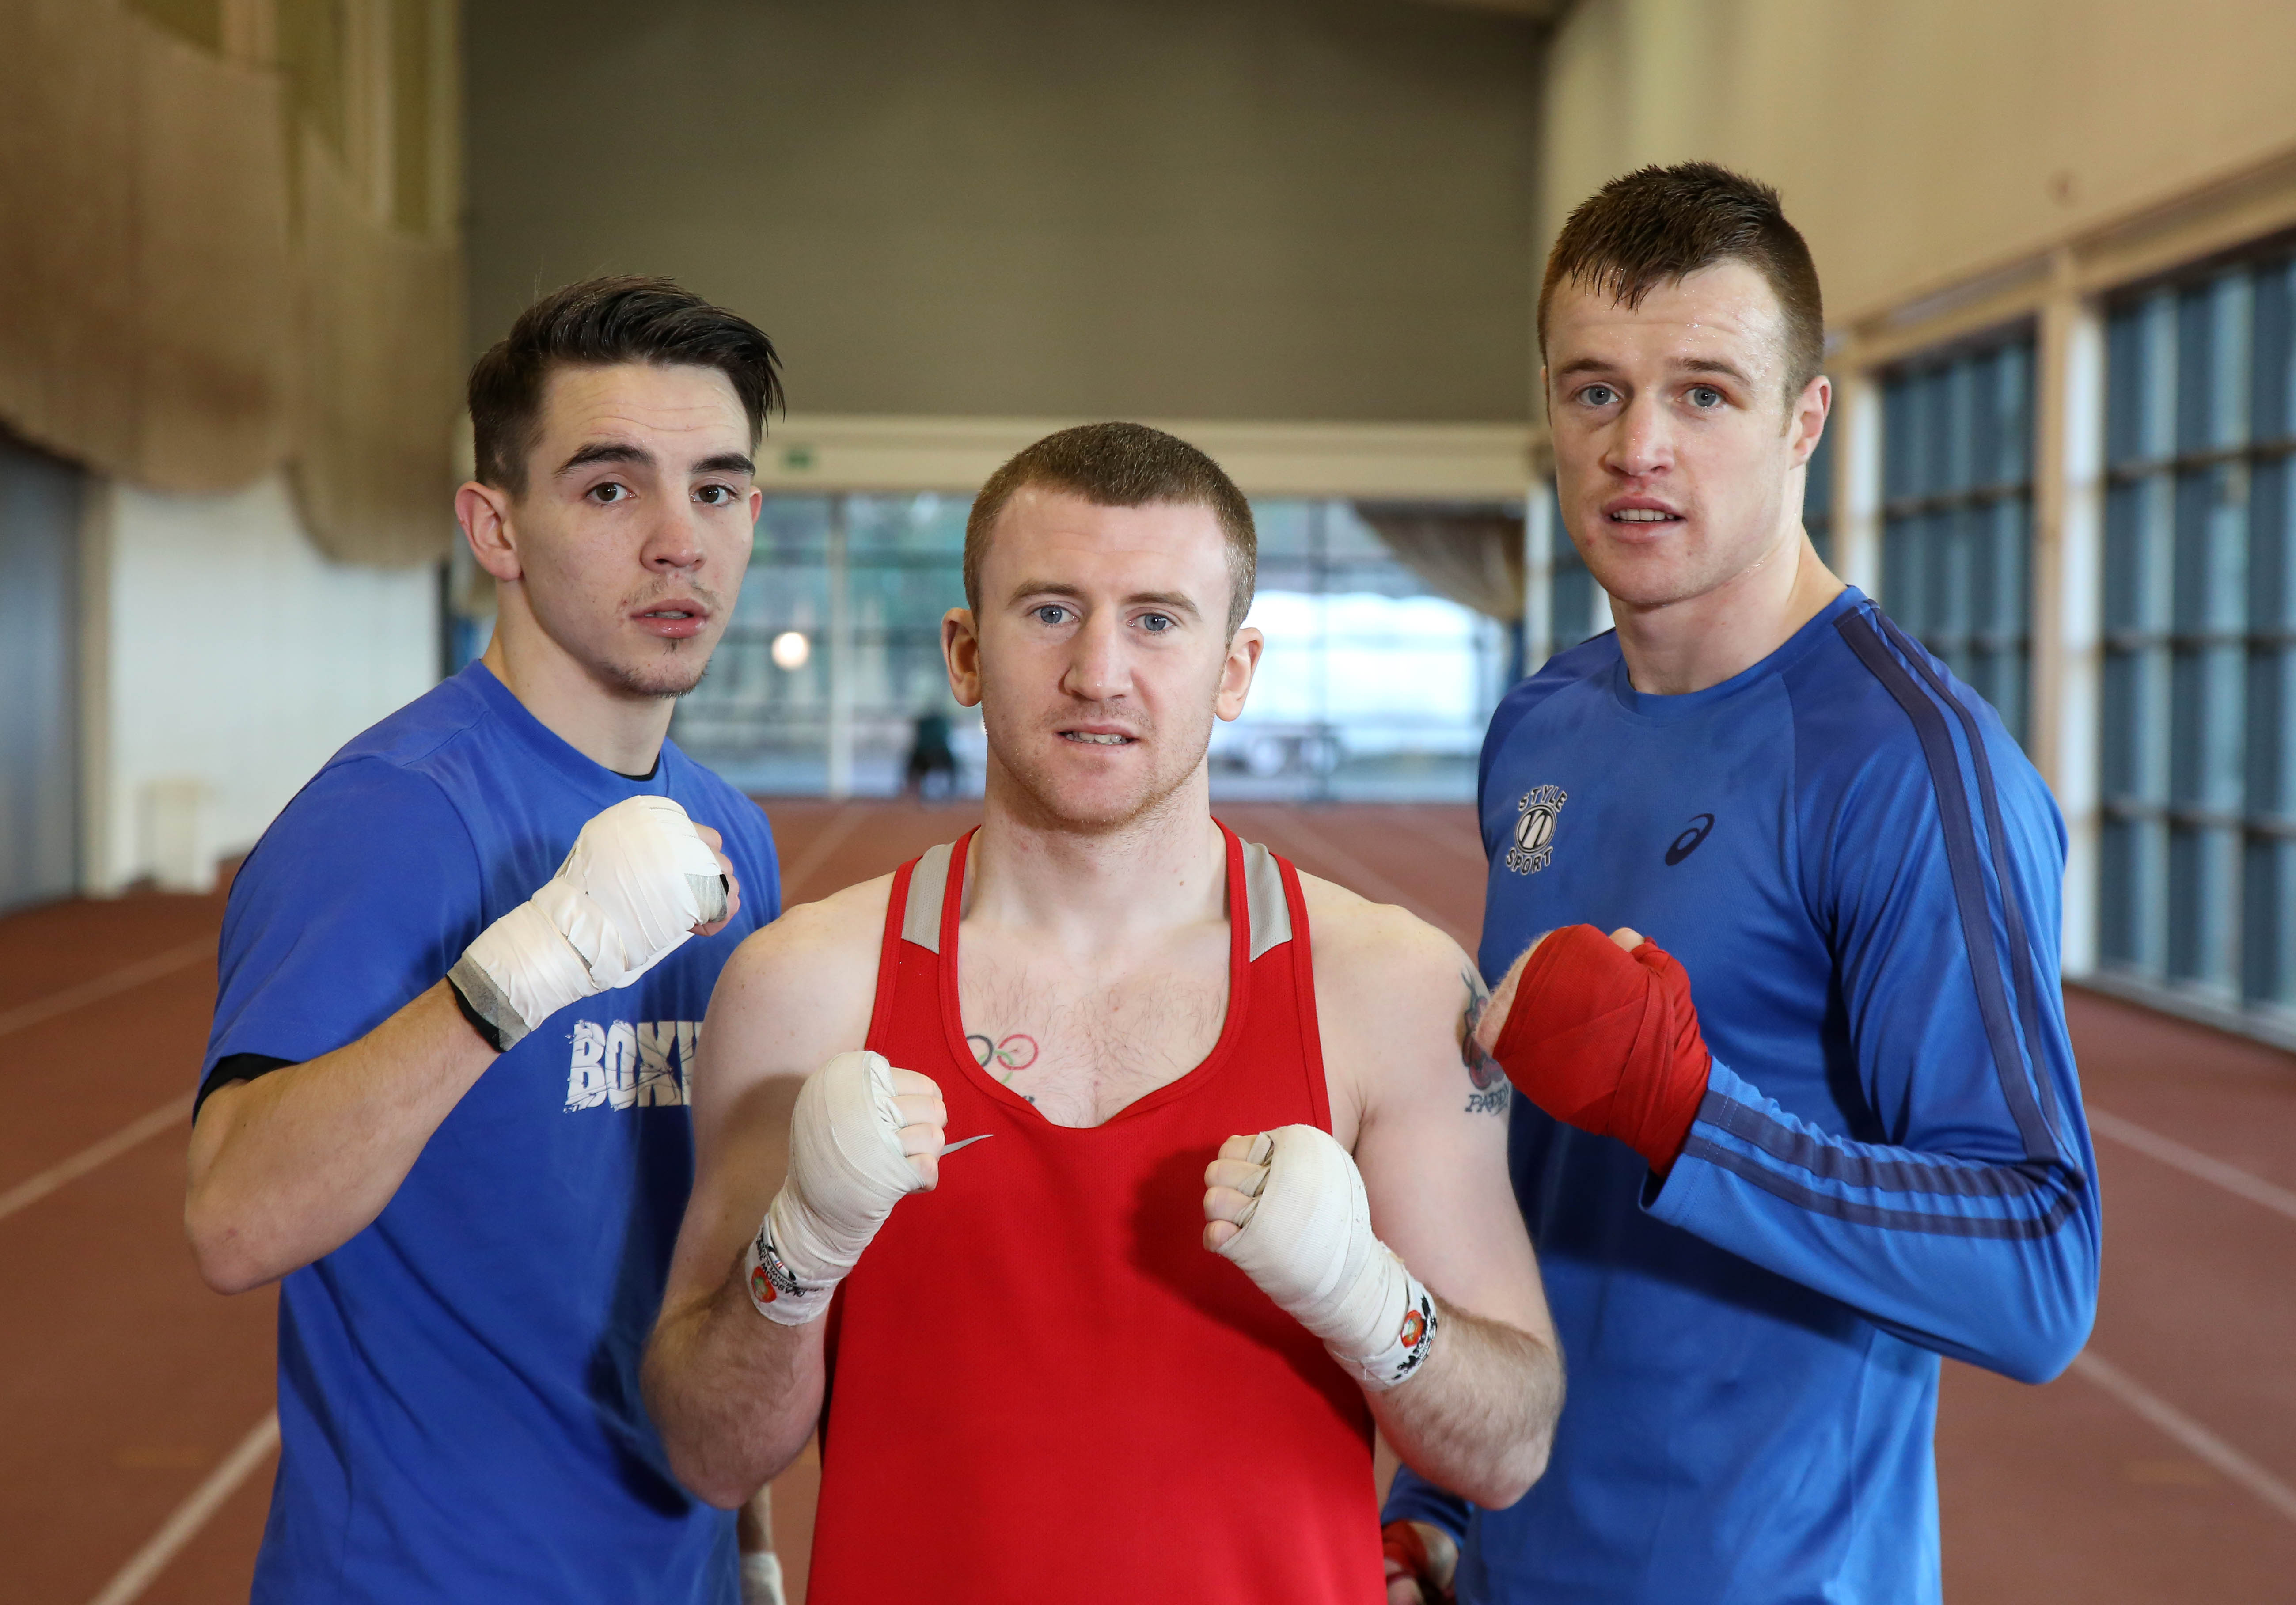 Boxers Michael Conlan, Paddy Barnes and Steven Donnelly, along with fellow Olympian Brendan Irvine, will be at the Devenish Complex on Friday, July 15 for the ‘Road To Rio’ event. A number of former Olympians will also be in attendance on a night which will celebrate the achievements of our local boxers before they fly out to Brazil 